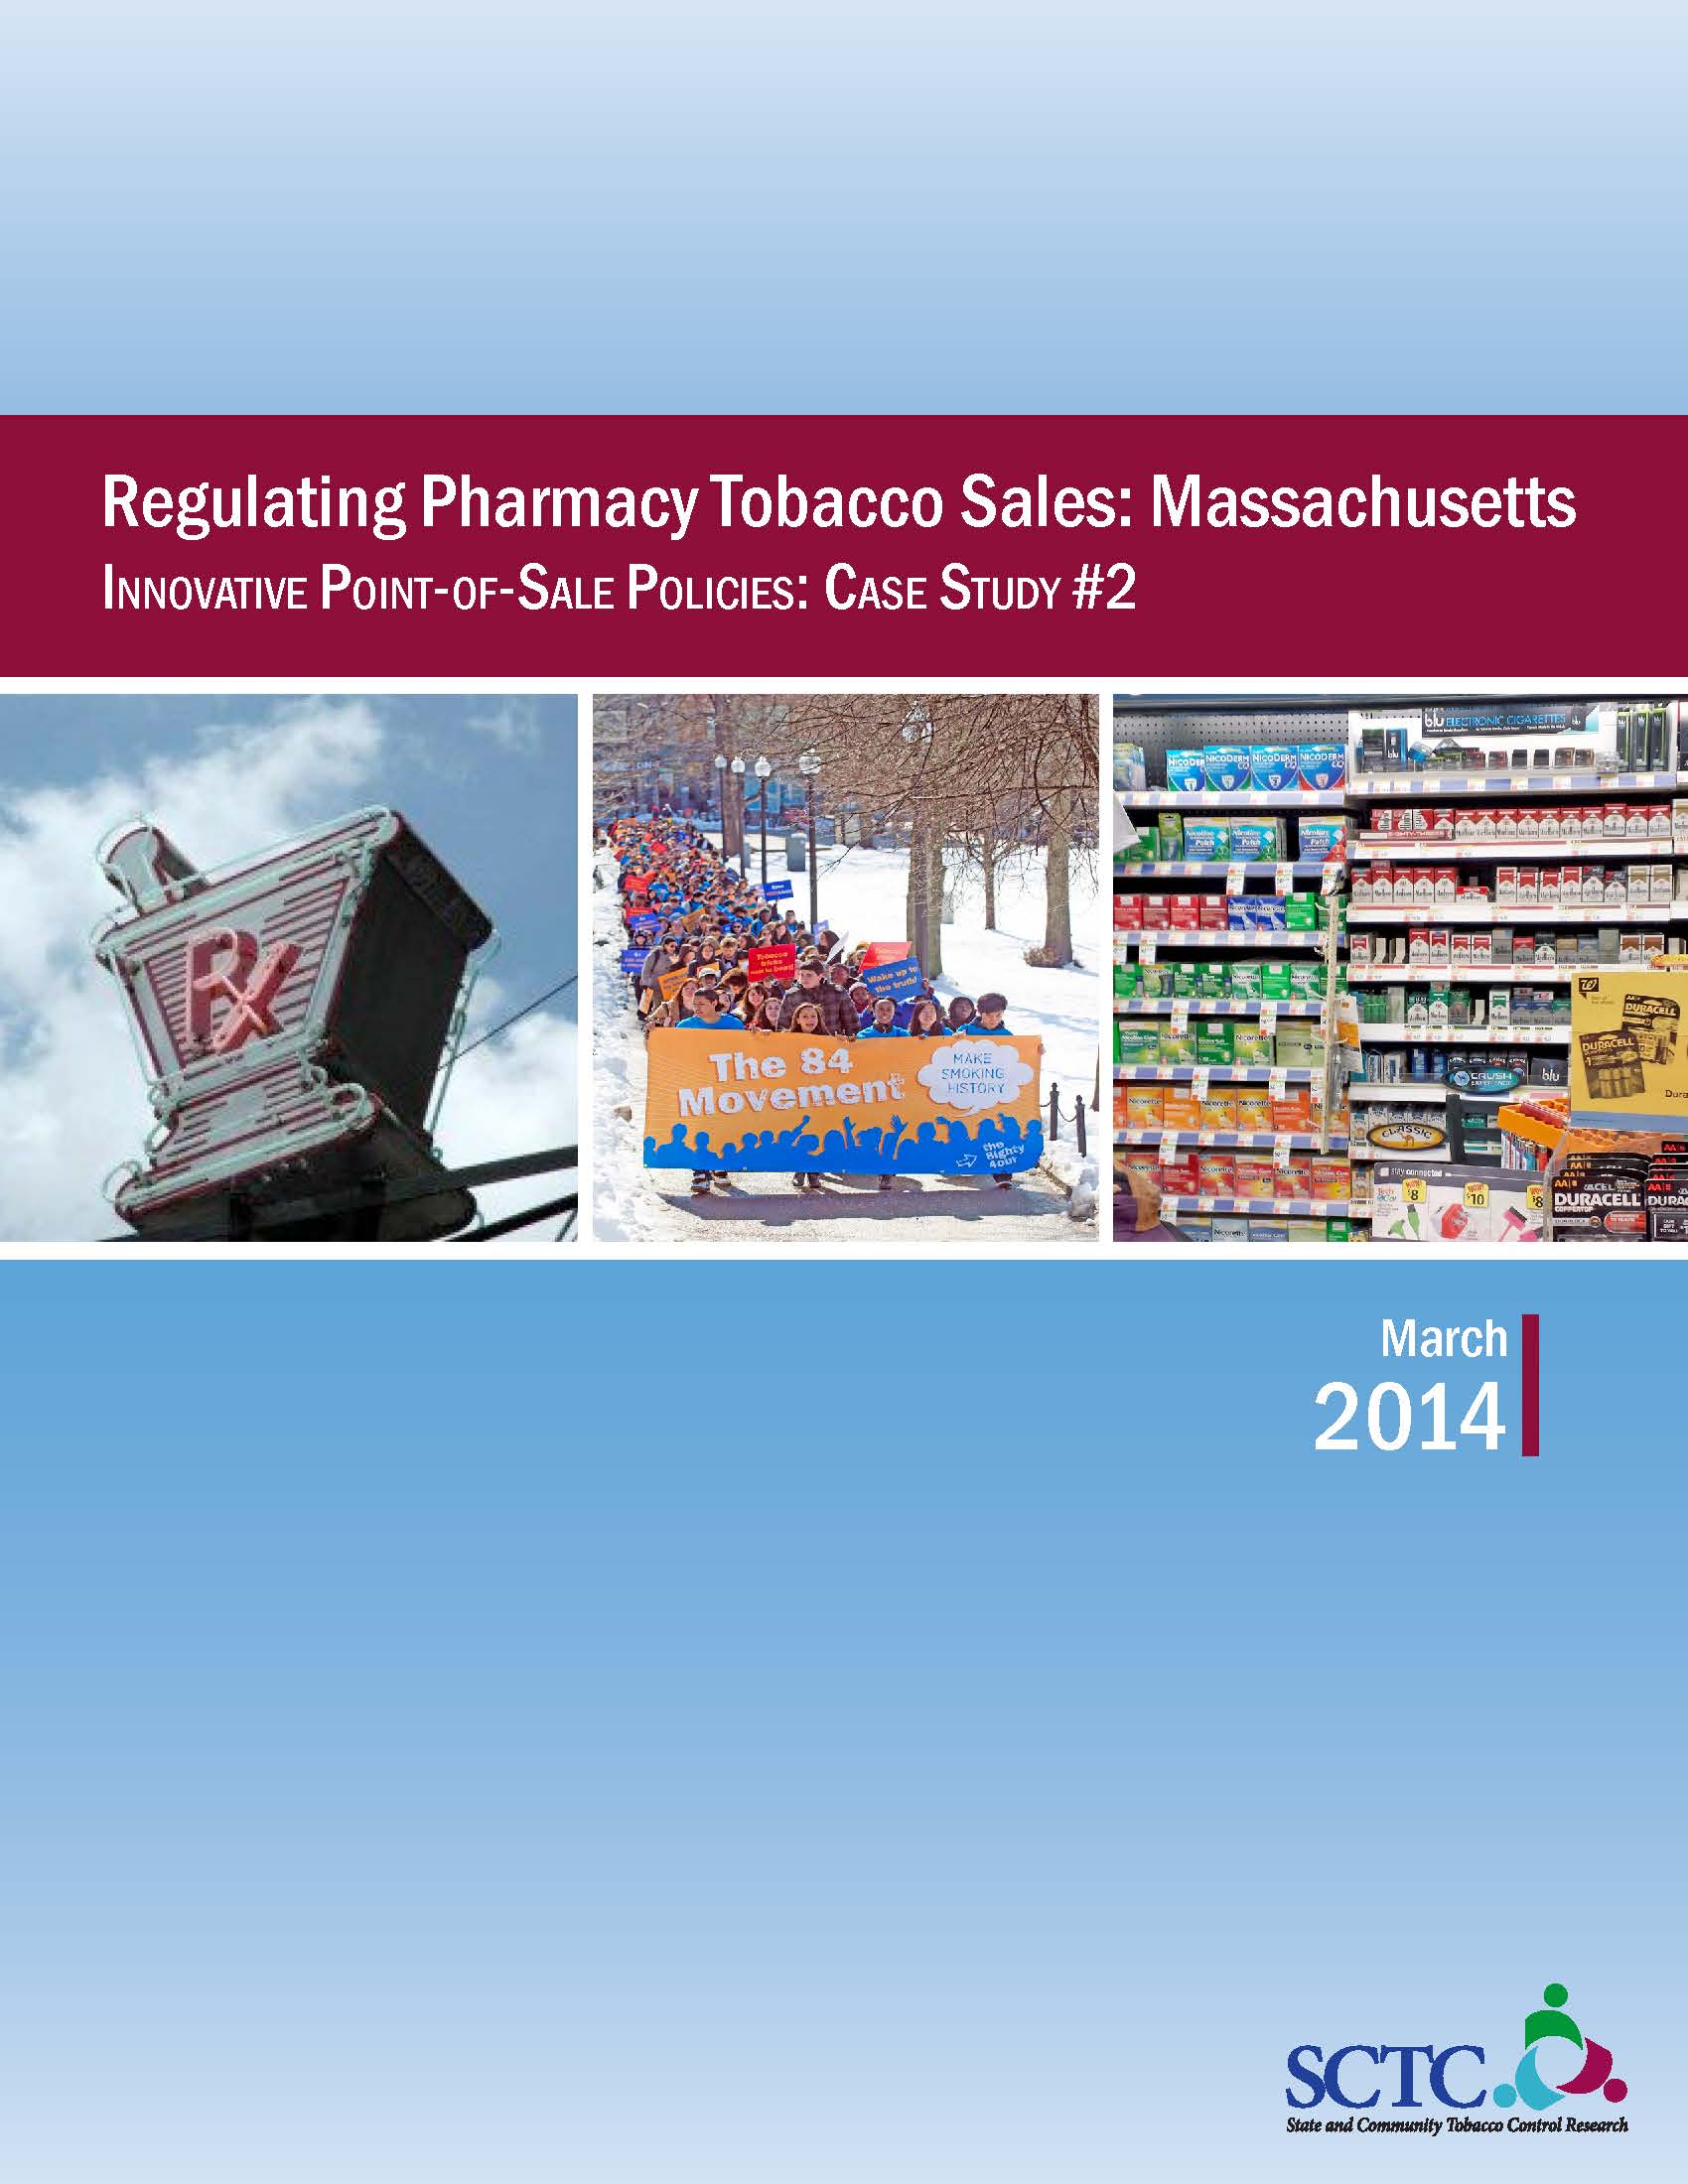 Cover page of "Regulating Pharmacy Tobacco Sales: Massachusetts" from March 2014